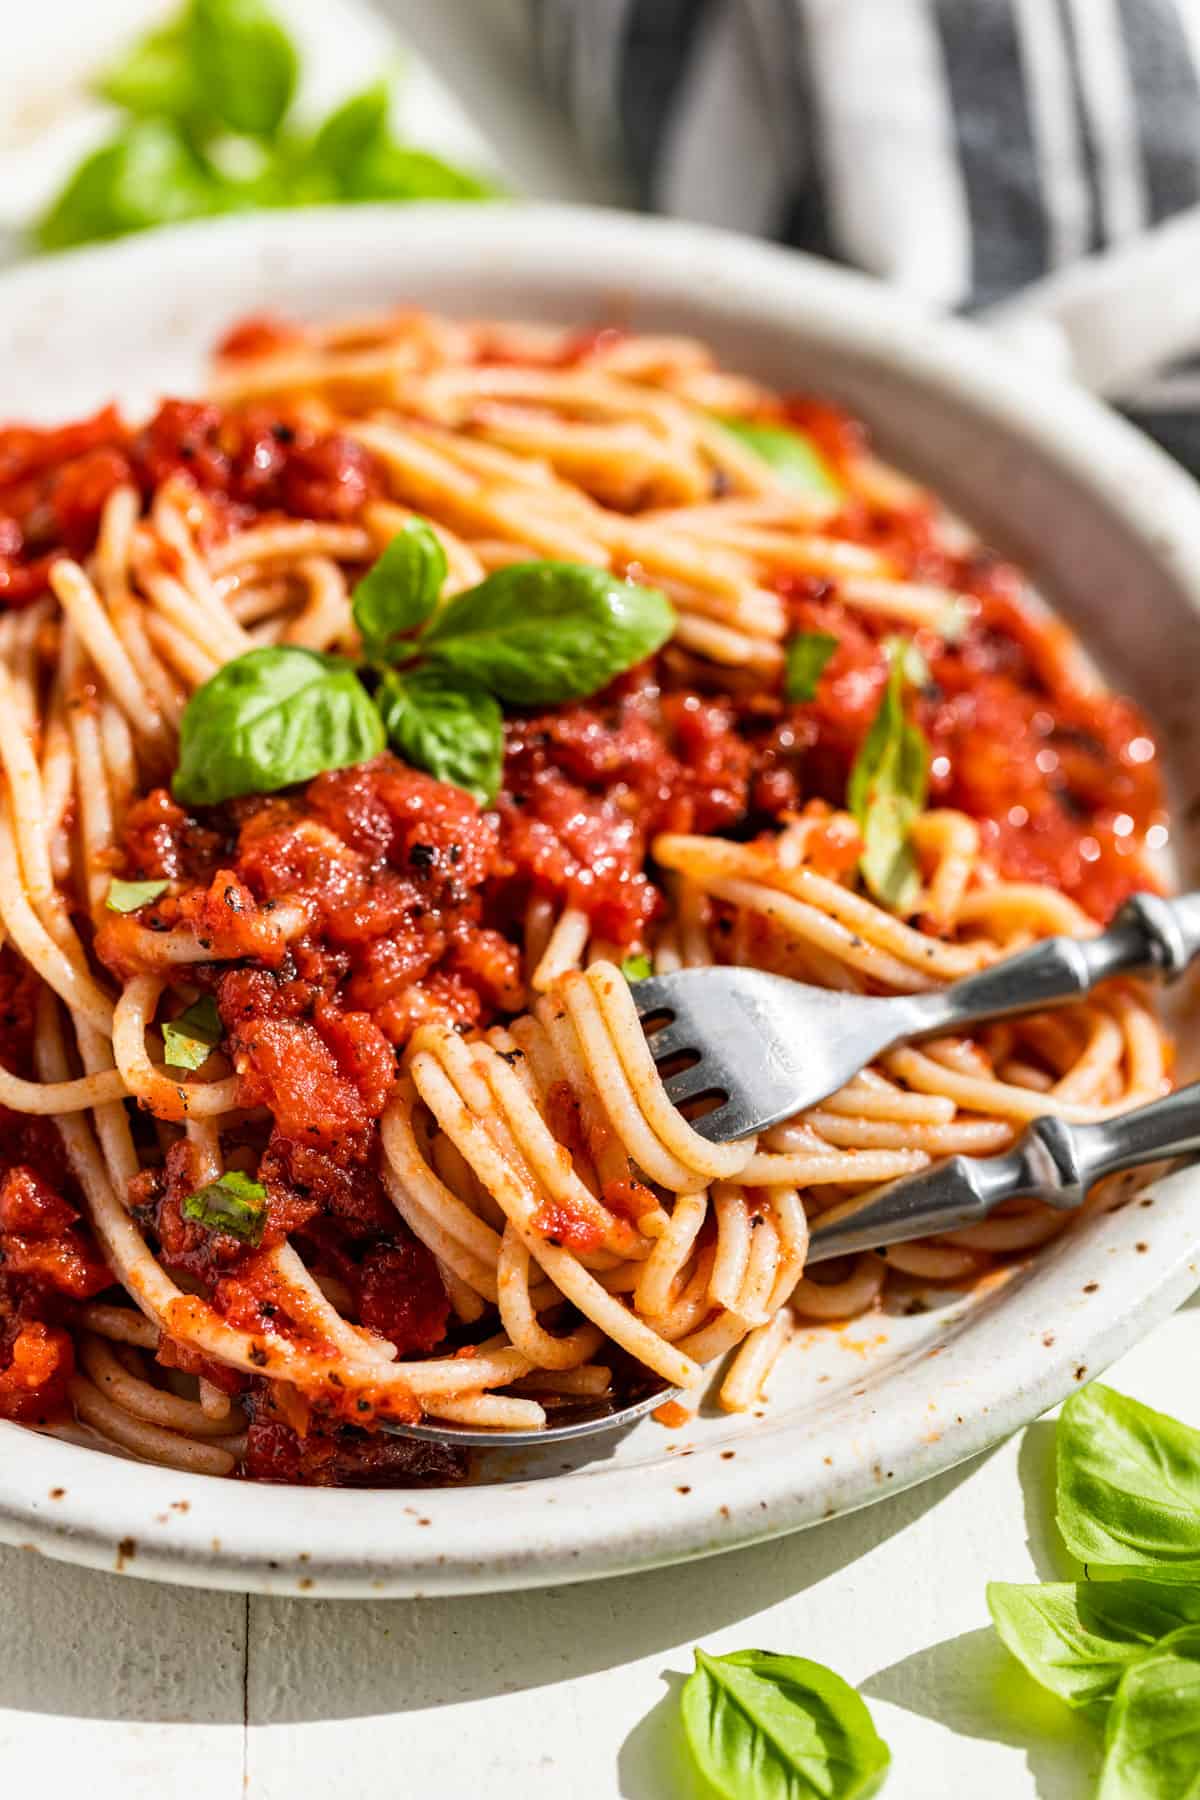 Marinara Sauce tossed together with spaghetti and topped with basil.